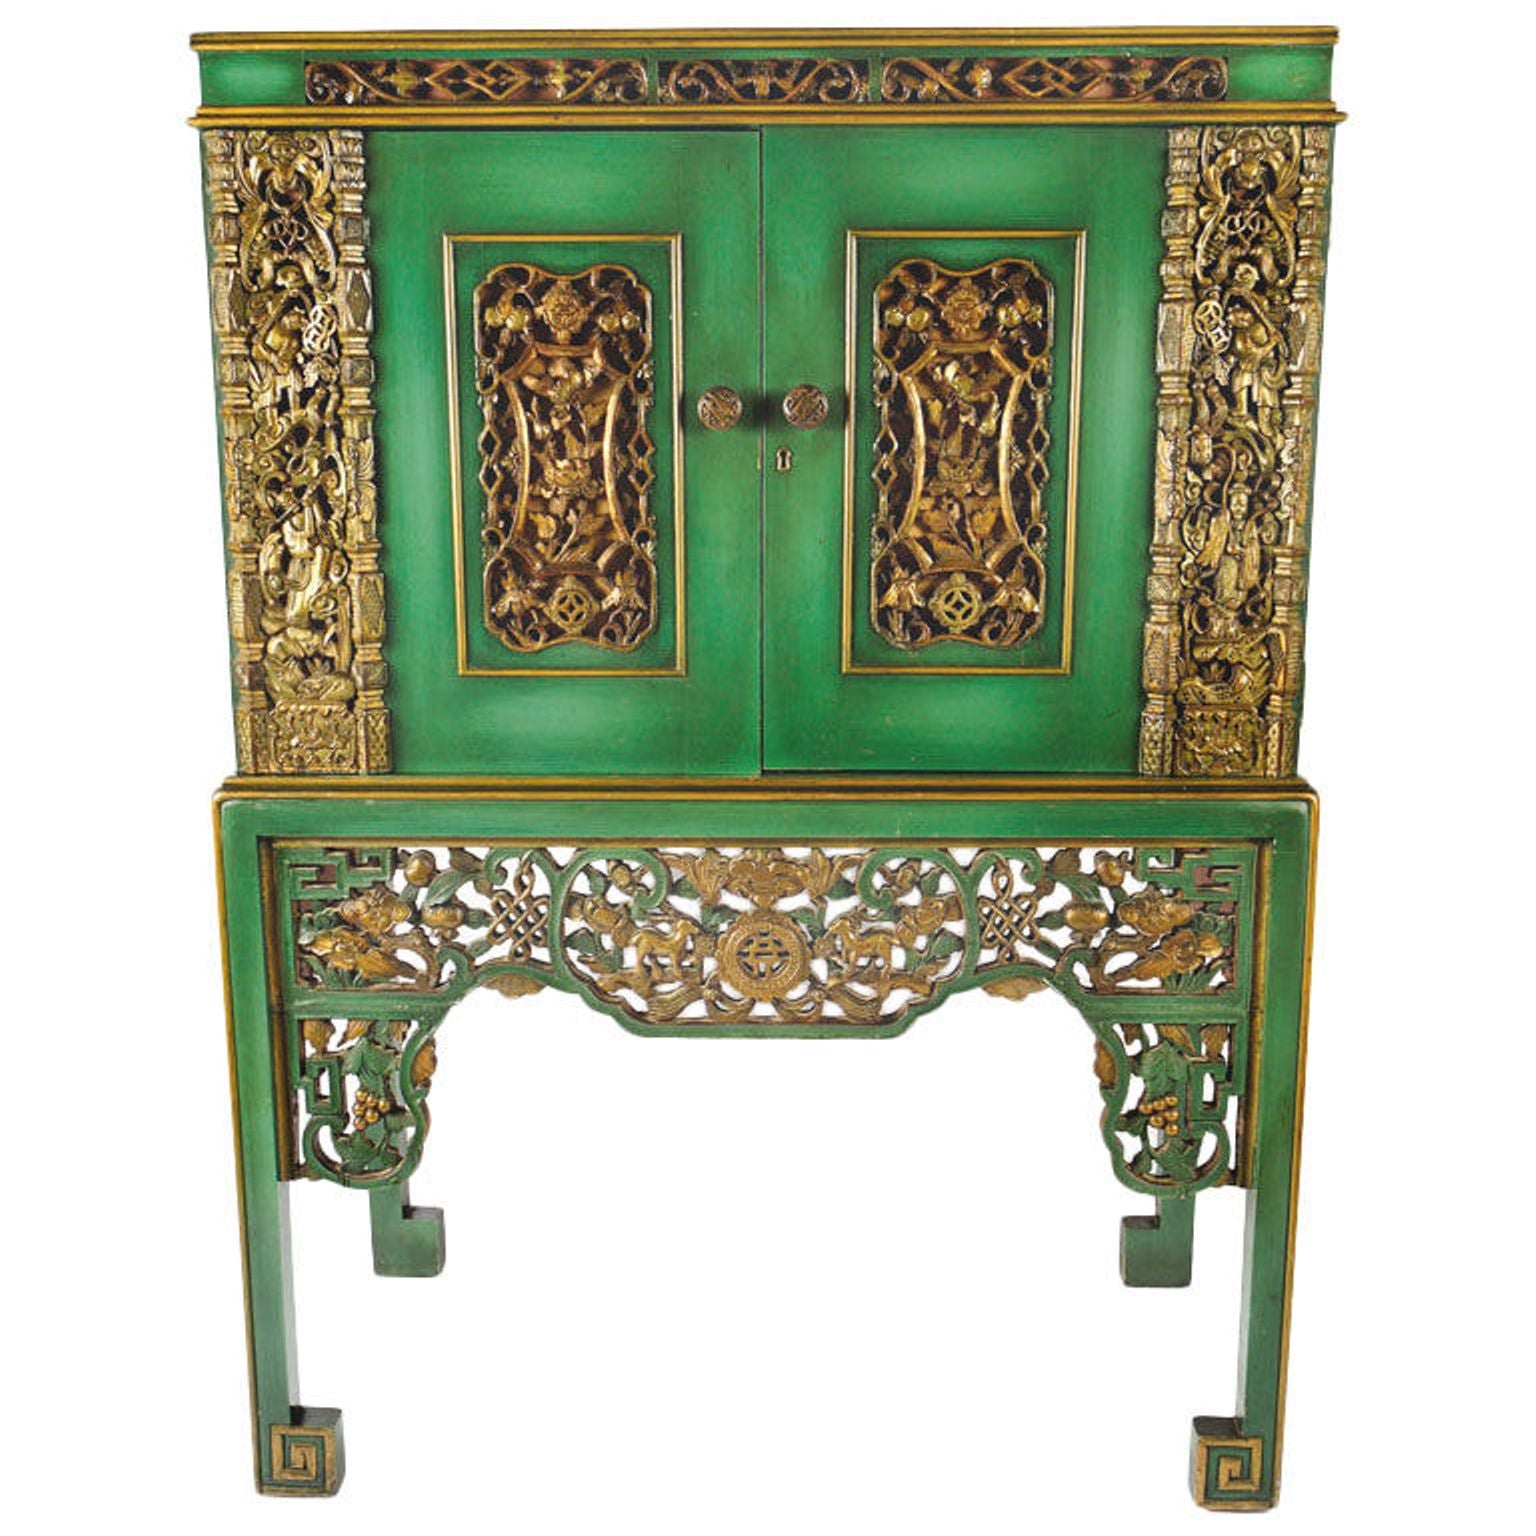 Emerald Green Chinese Cabinet Inset with Gilt Antique Panels